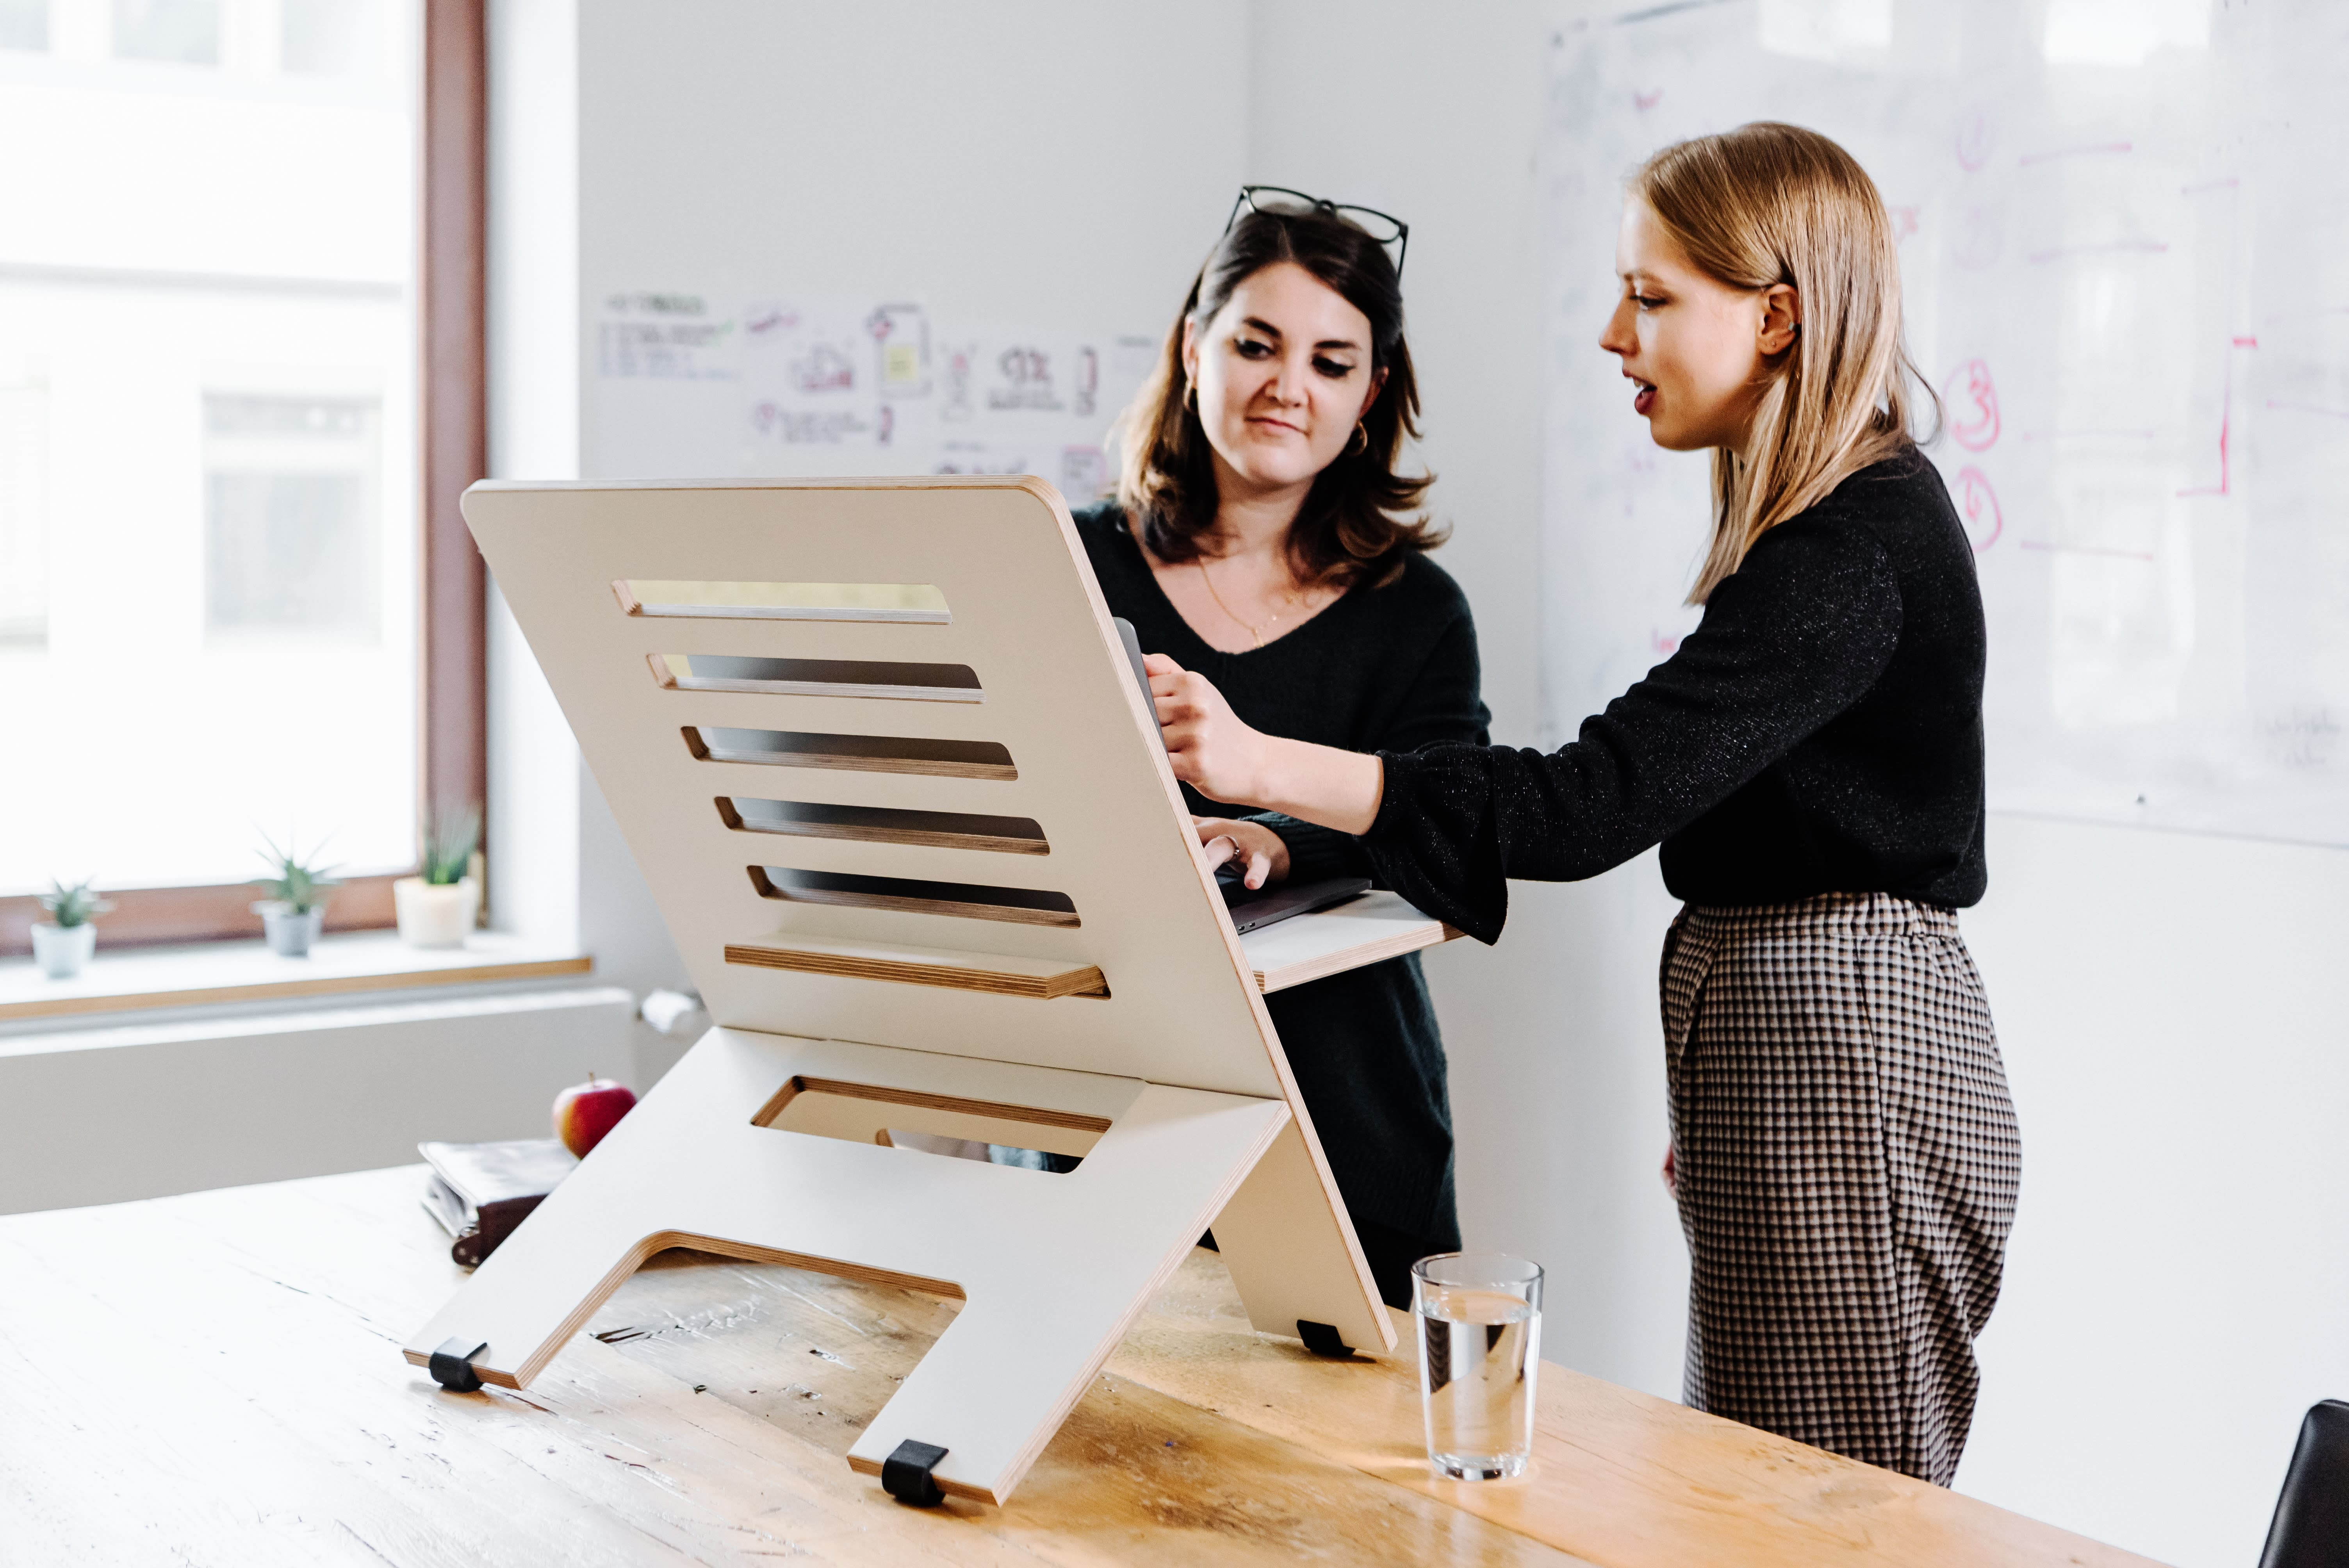 Women working upright on a standing desk